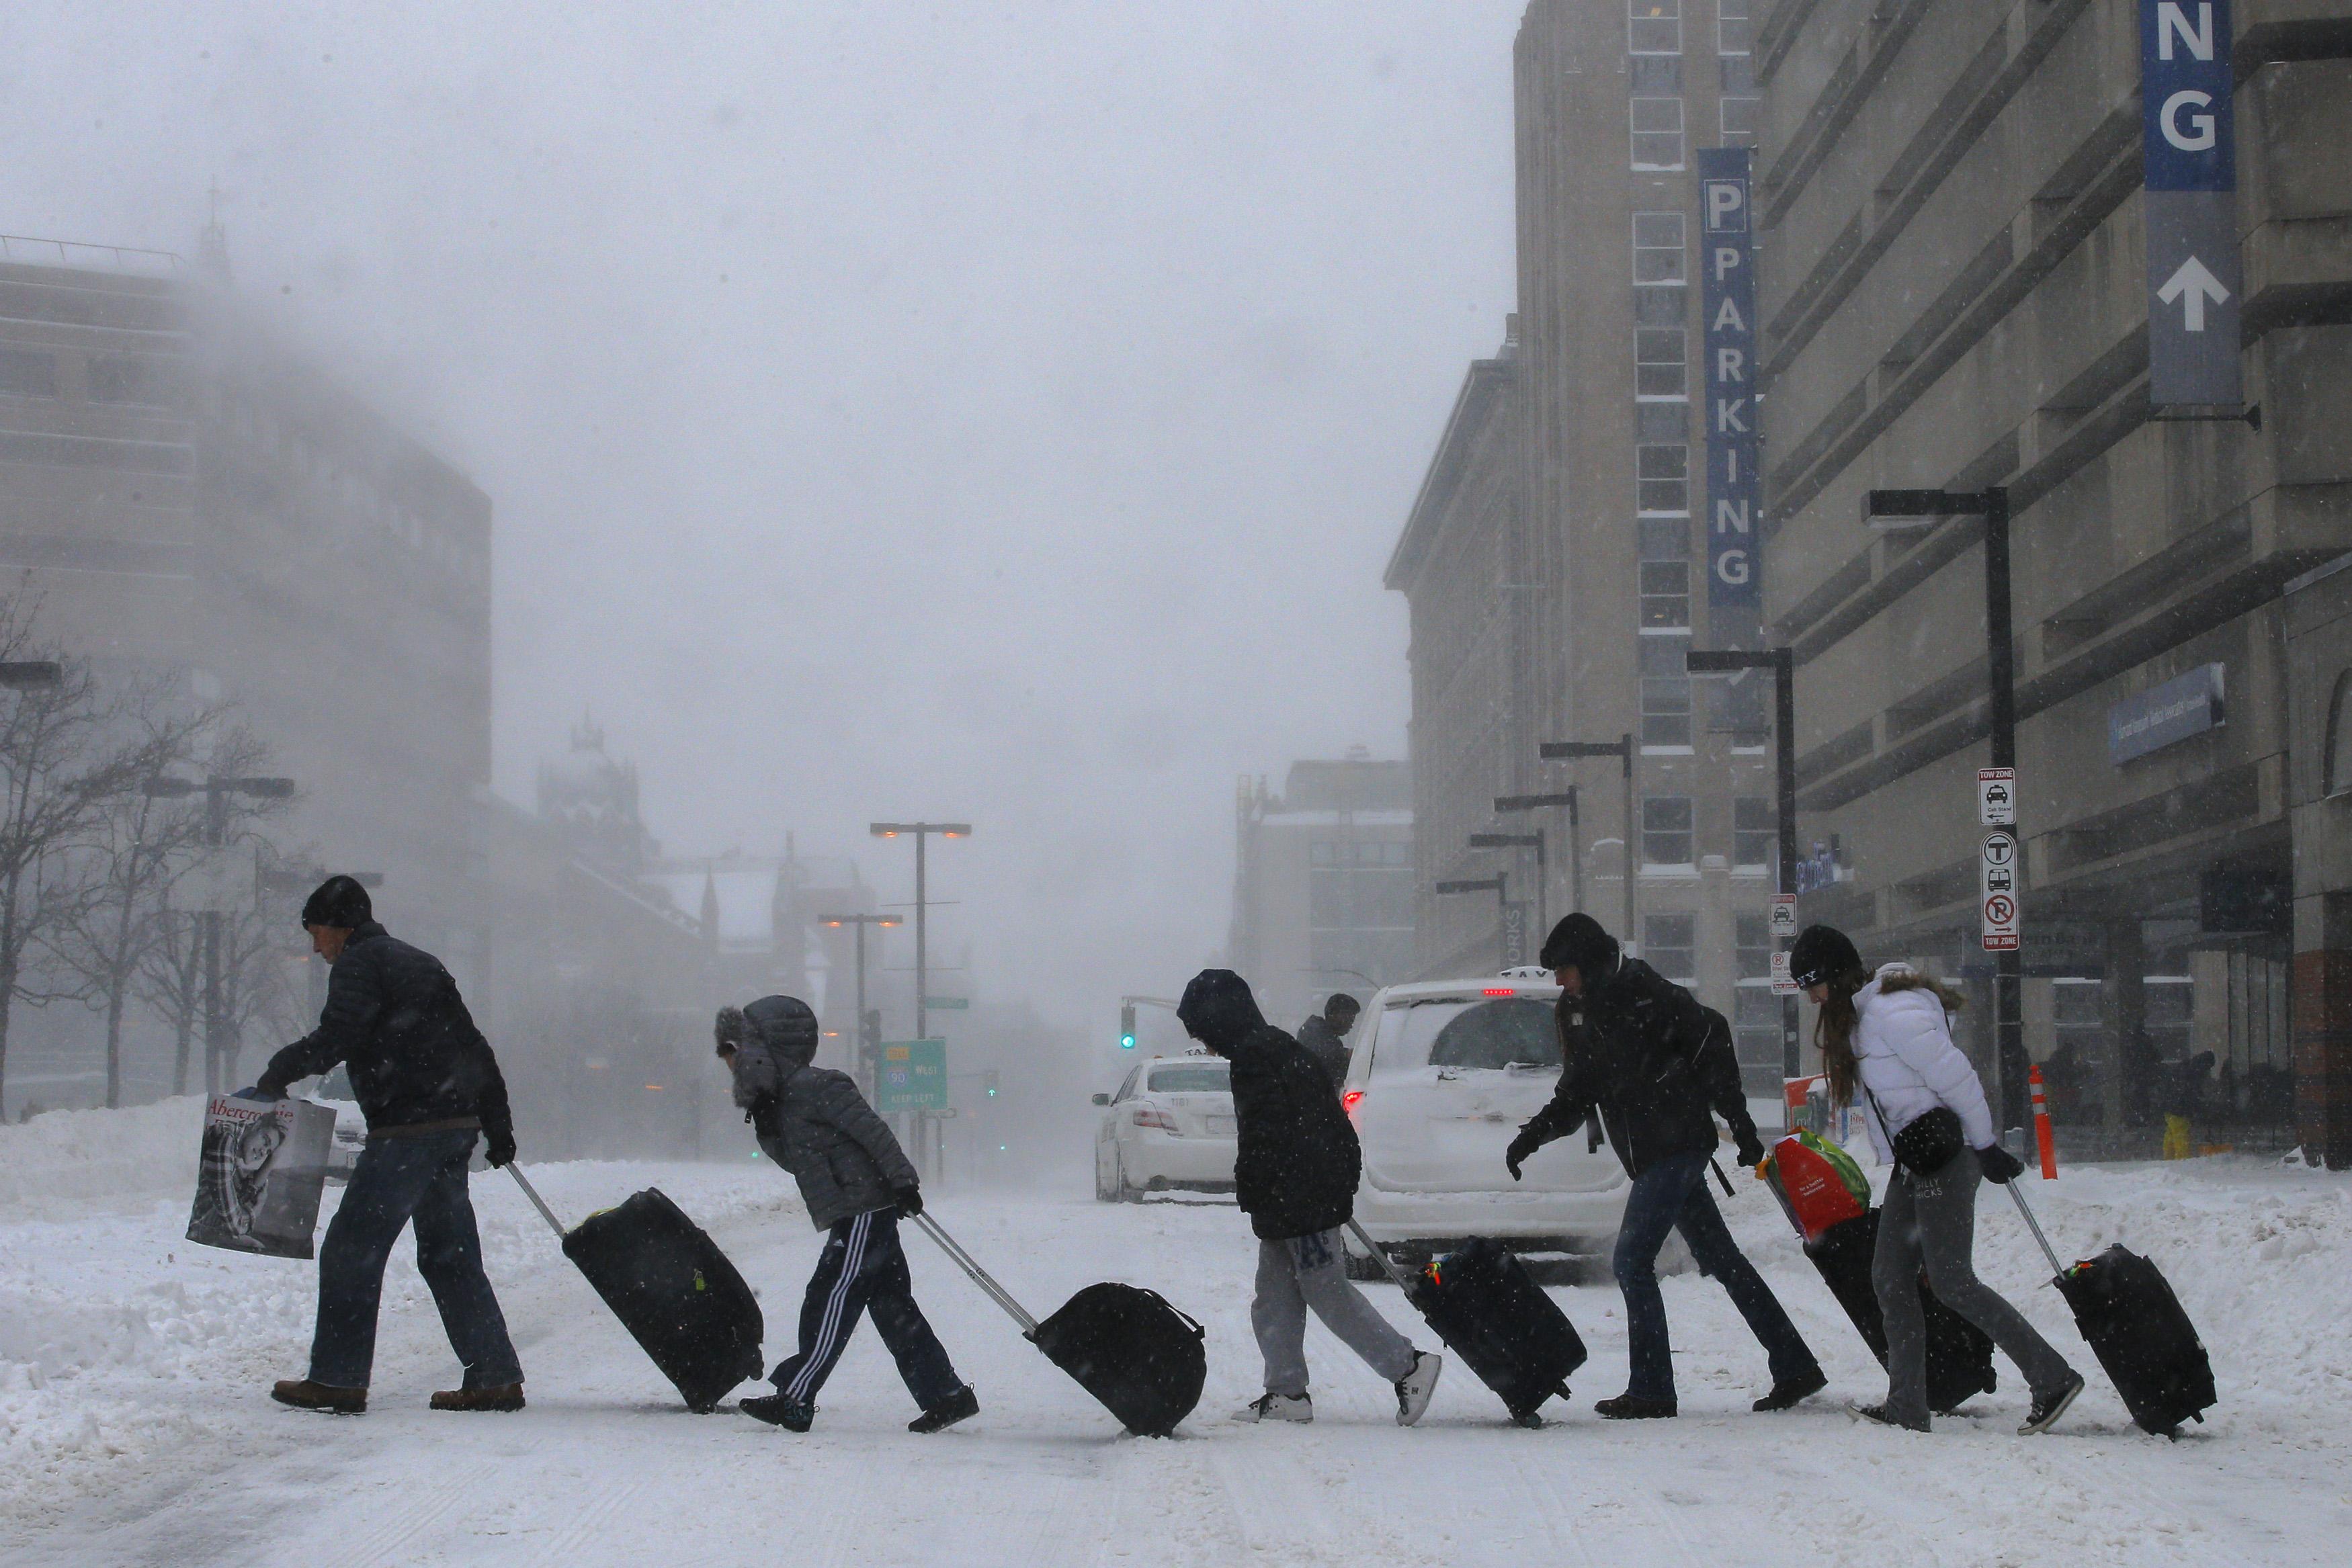 Travelers leave the Back Bay train and subway station during a winter polar vortex snow storm in Boston, Massachusetts, U.S. on January 3, 2014.   REUTERS/Brian Snyder/File Photo